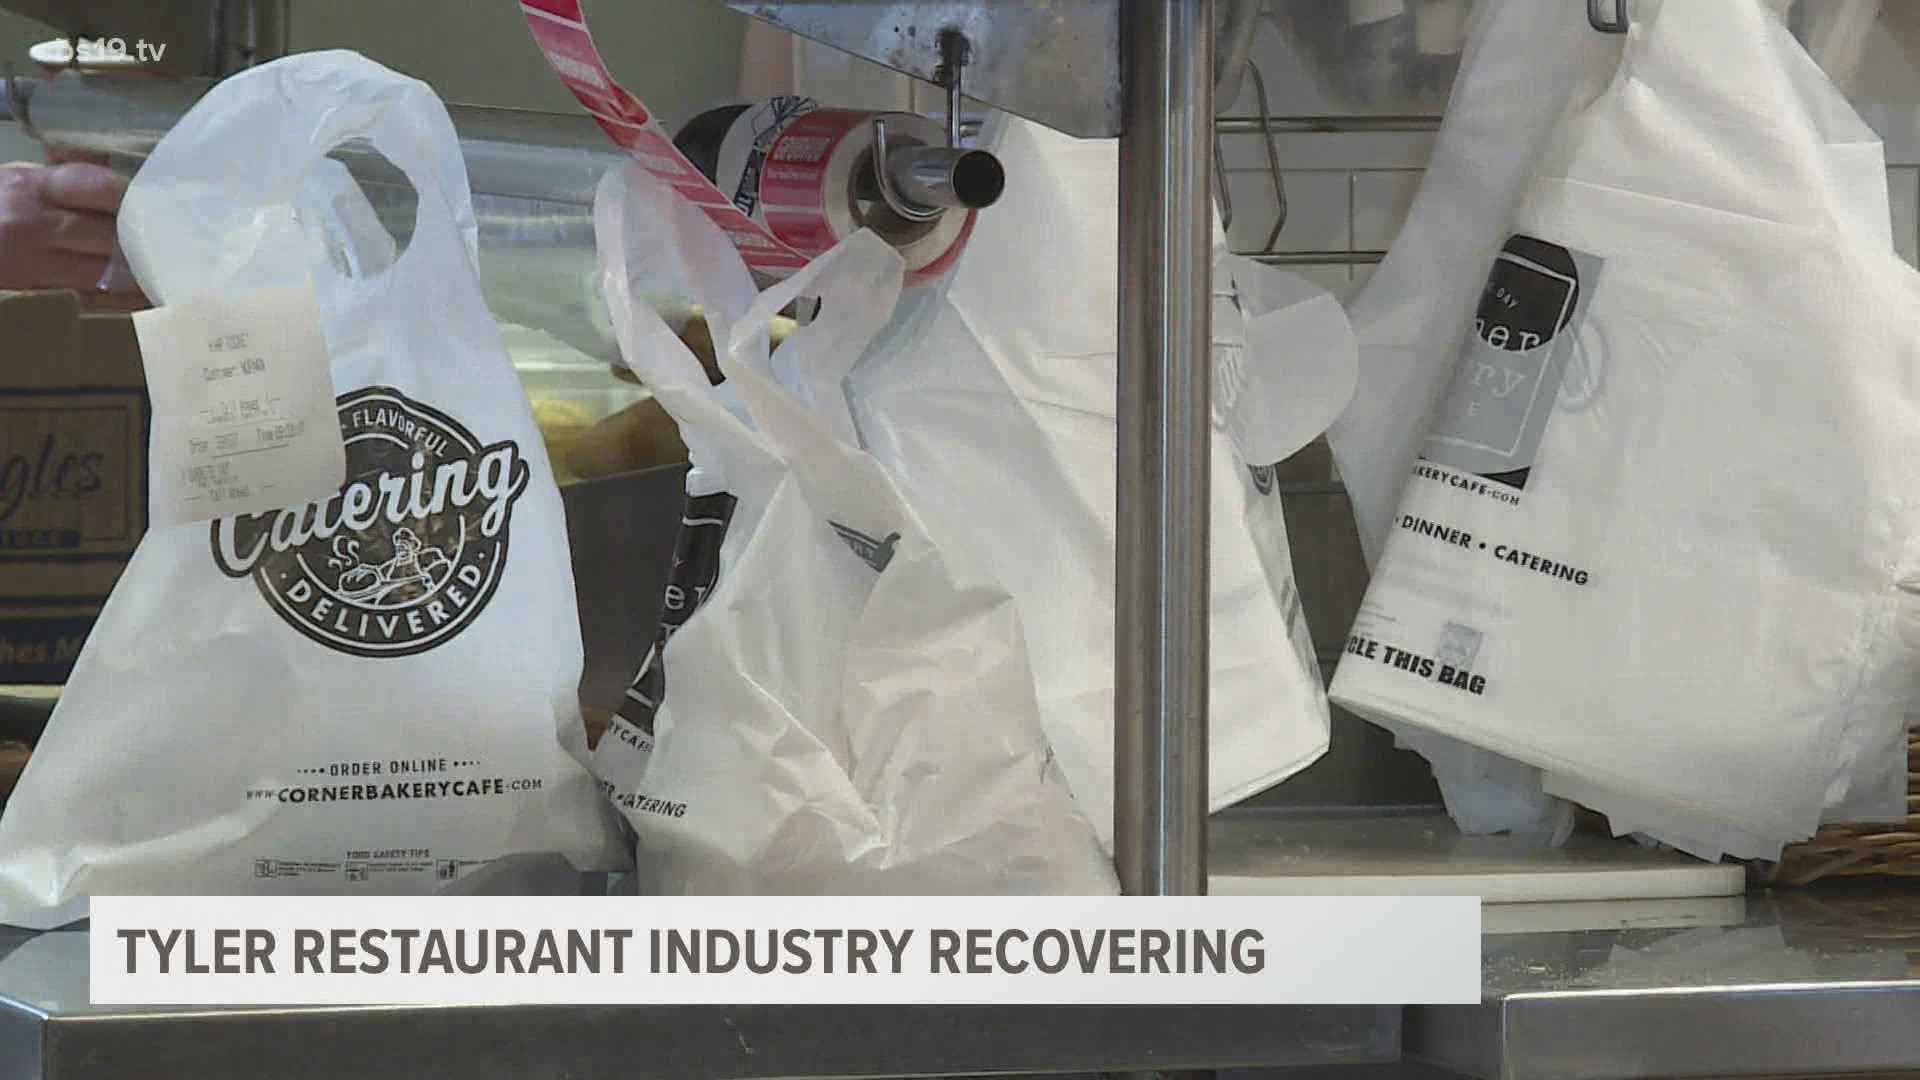 "Restaurants have always had to deal with a lot of ups and downs, but we're survivors," said one restaurant owner.